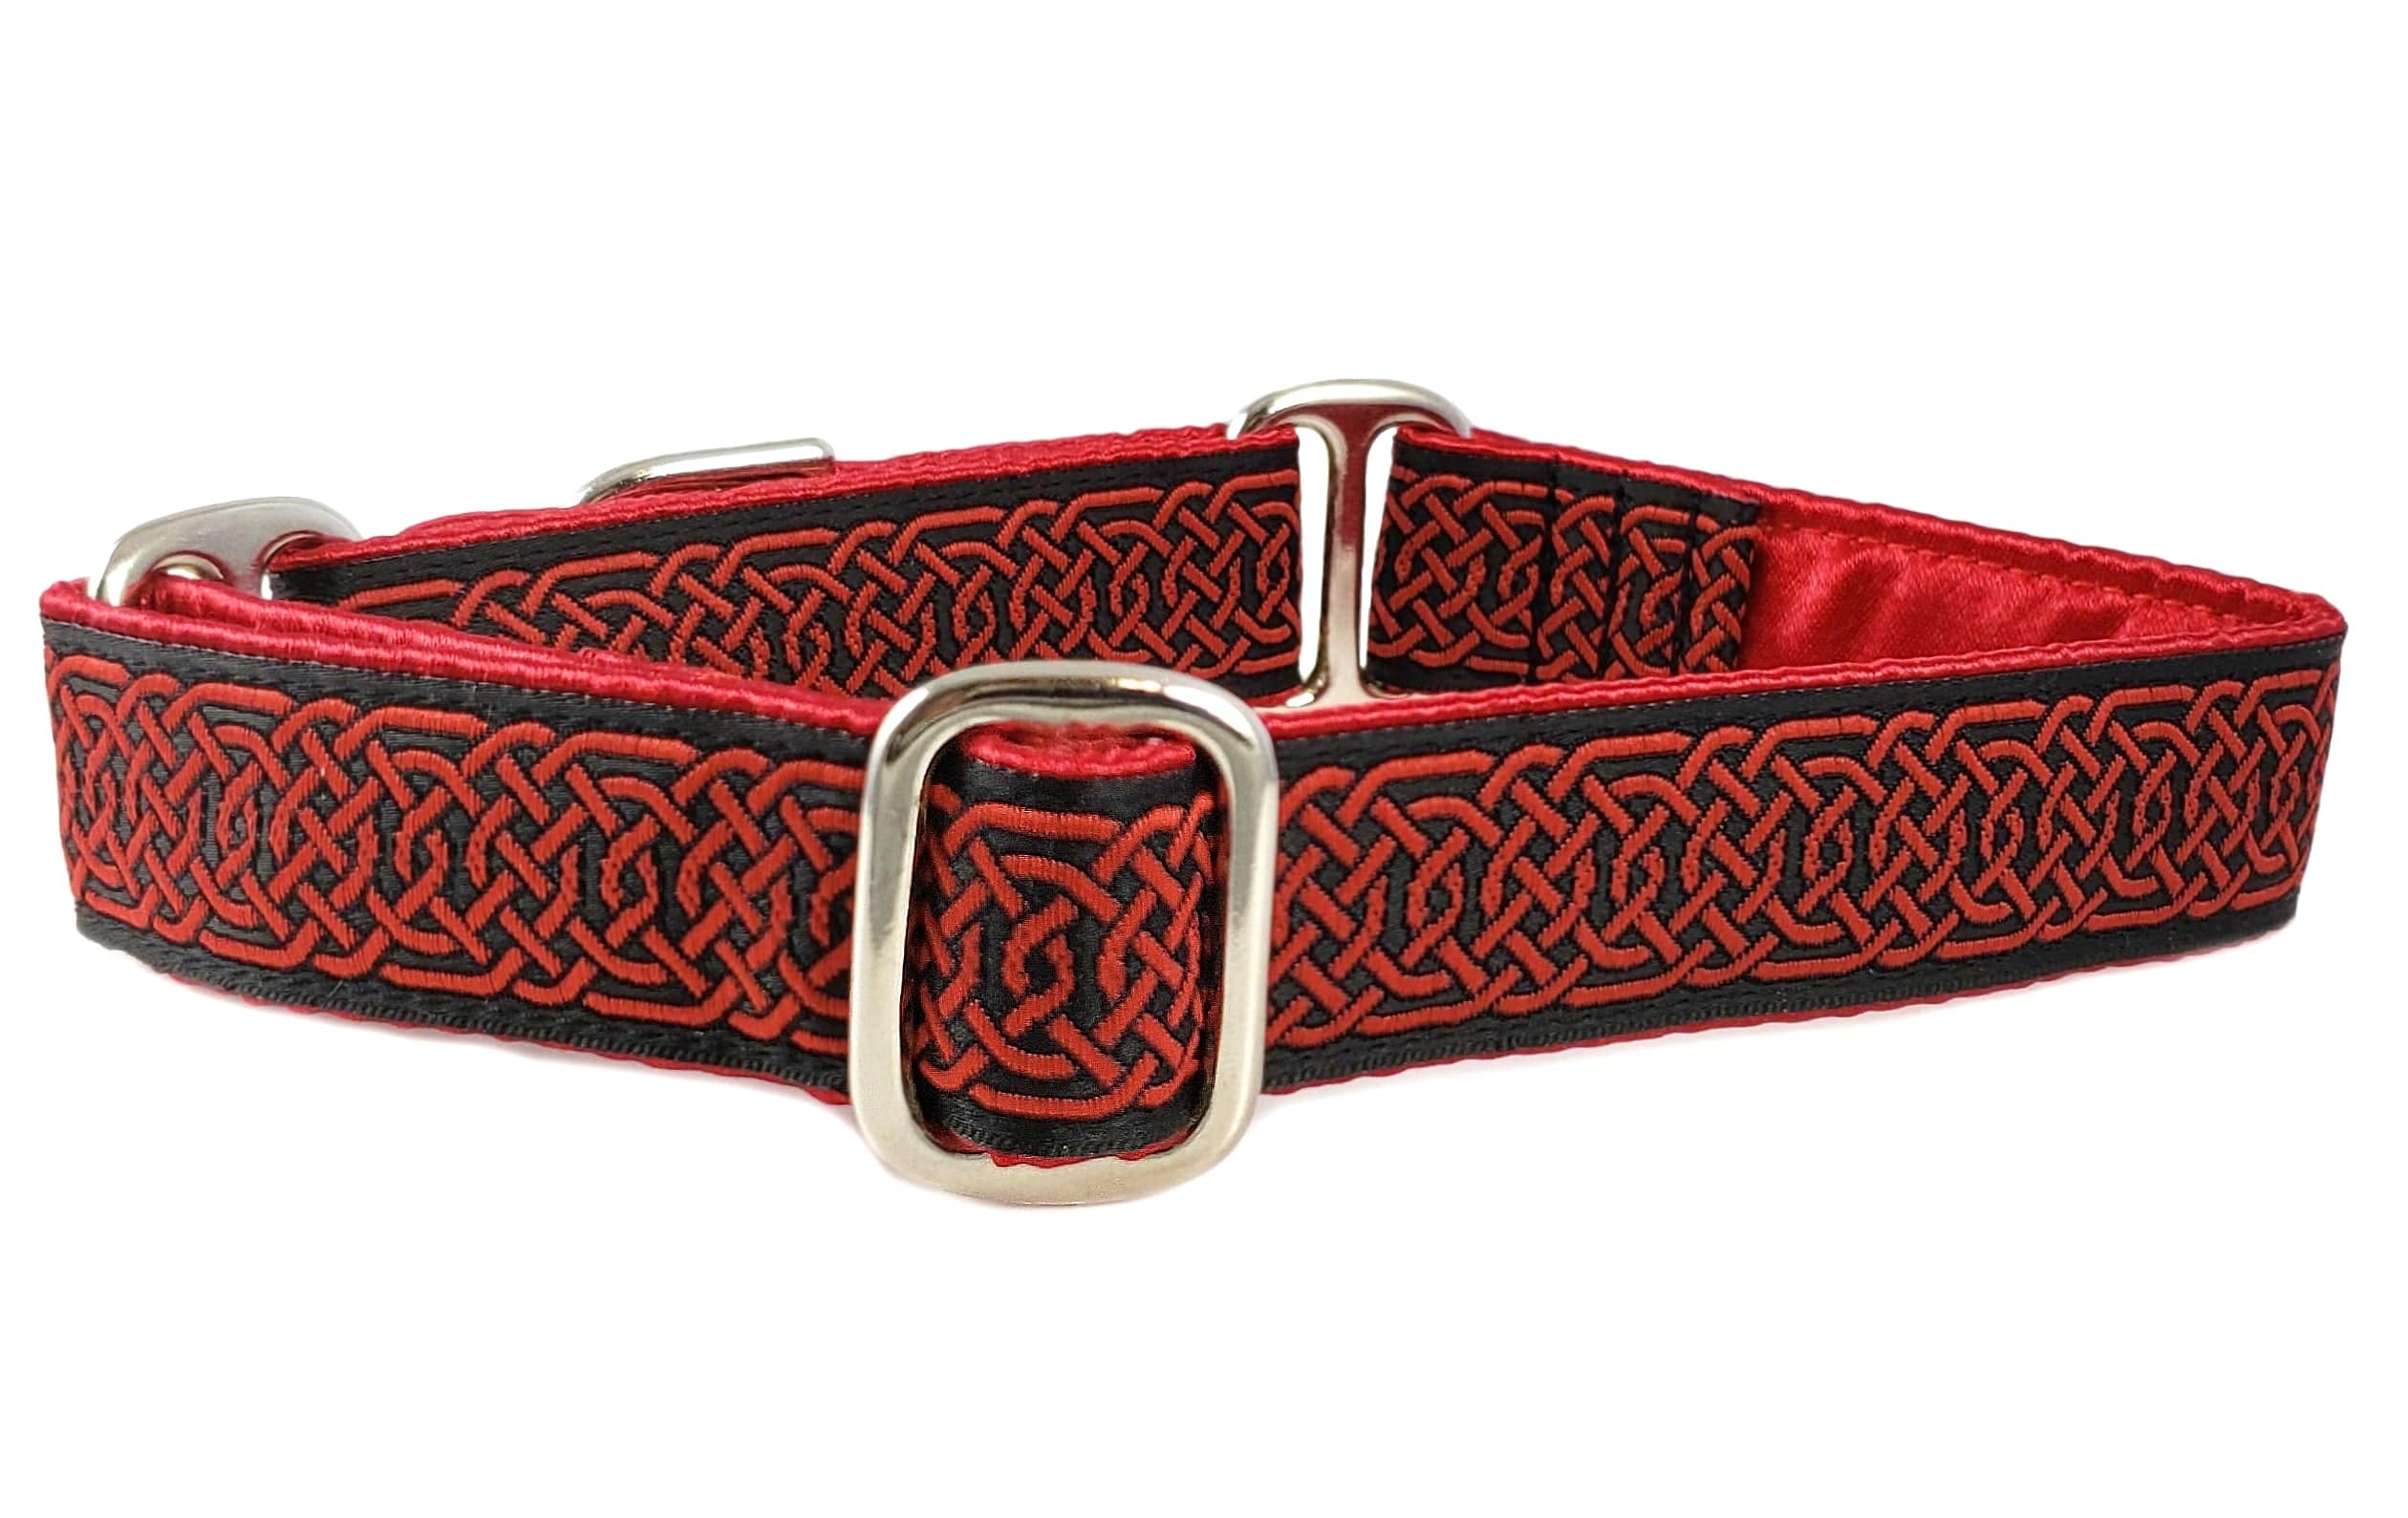 The Hound Haberdashery Collar Wexford Jacquard in Black & Red - Martingale Dog Collar or Buckle Dog Collar - 1" Width